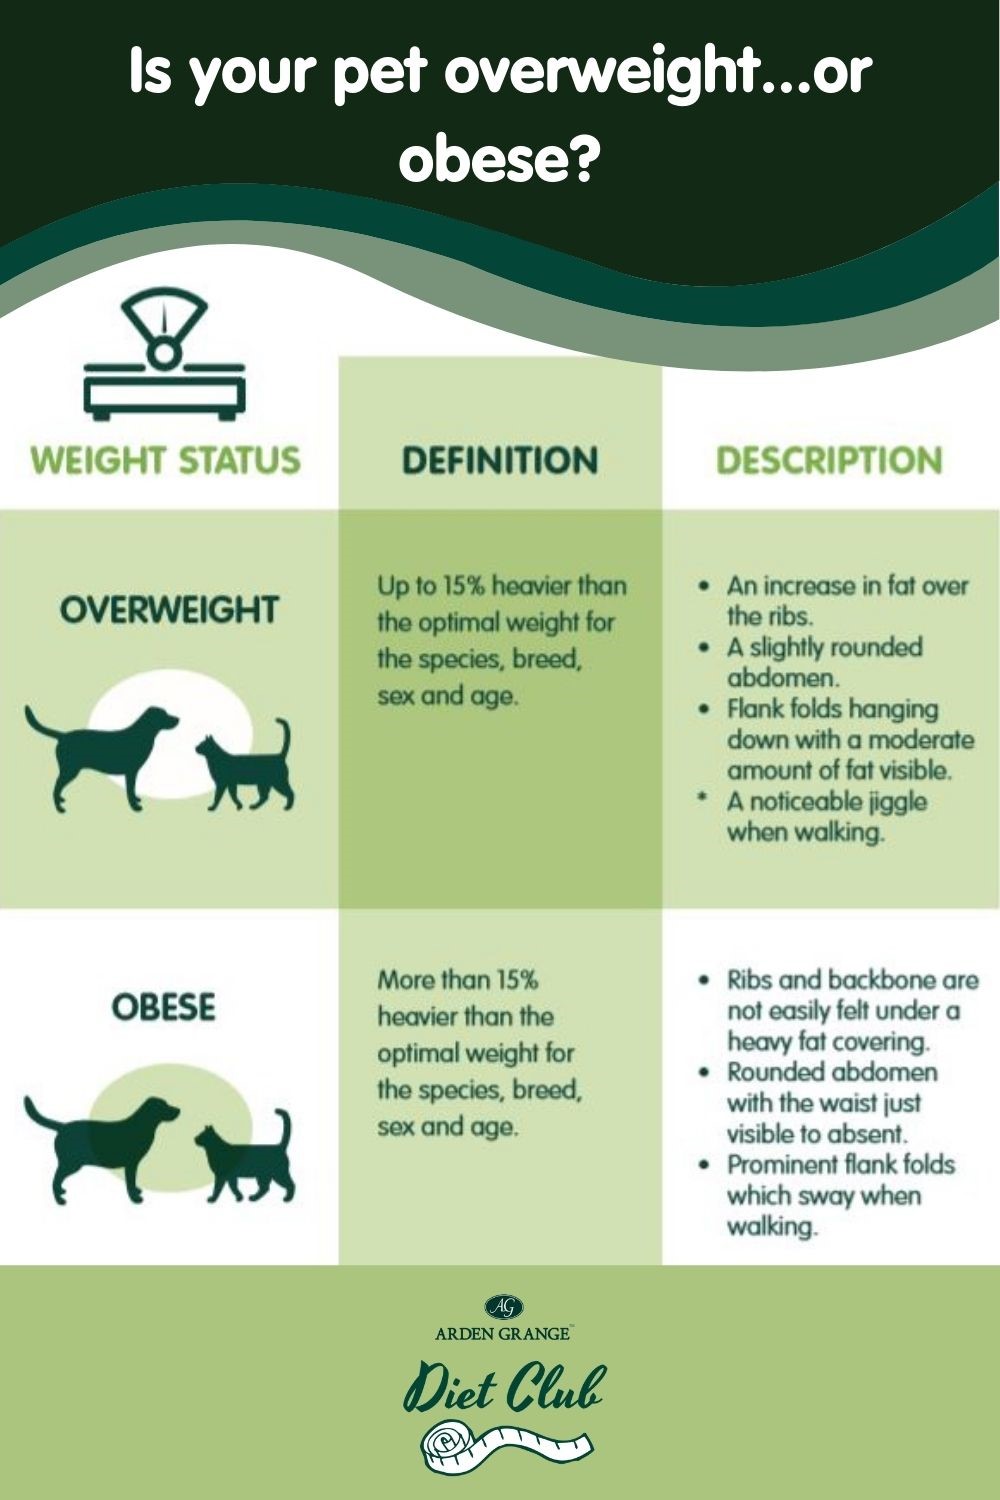 How to tell if your cat or dog is overweight or obese